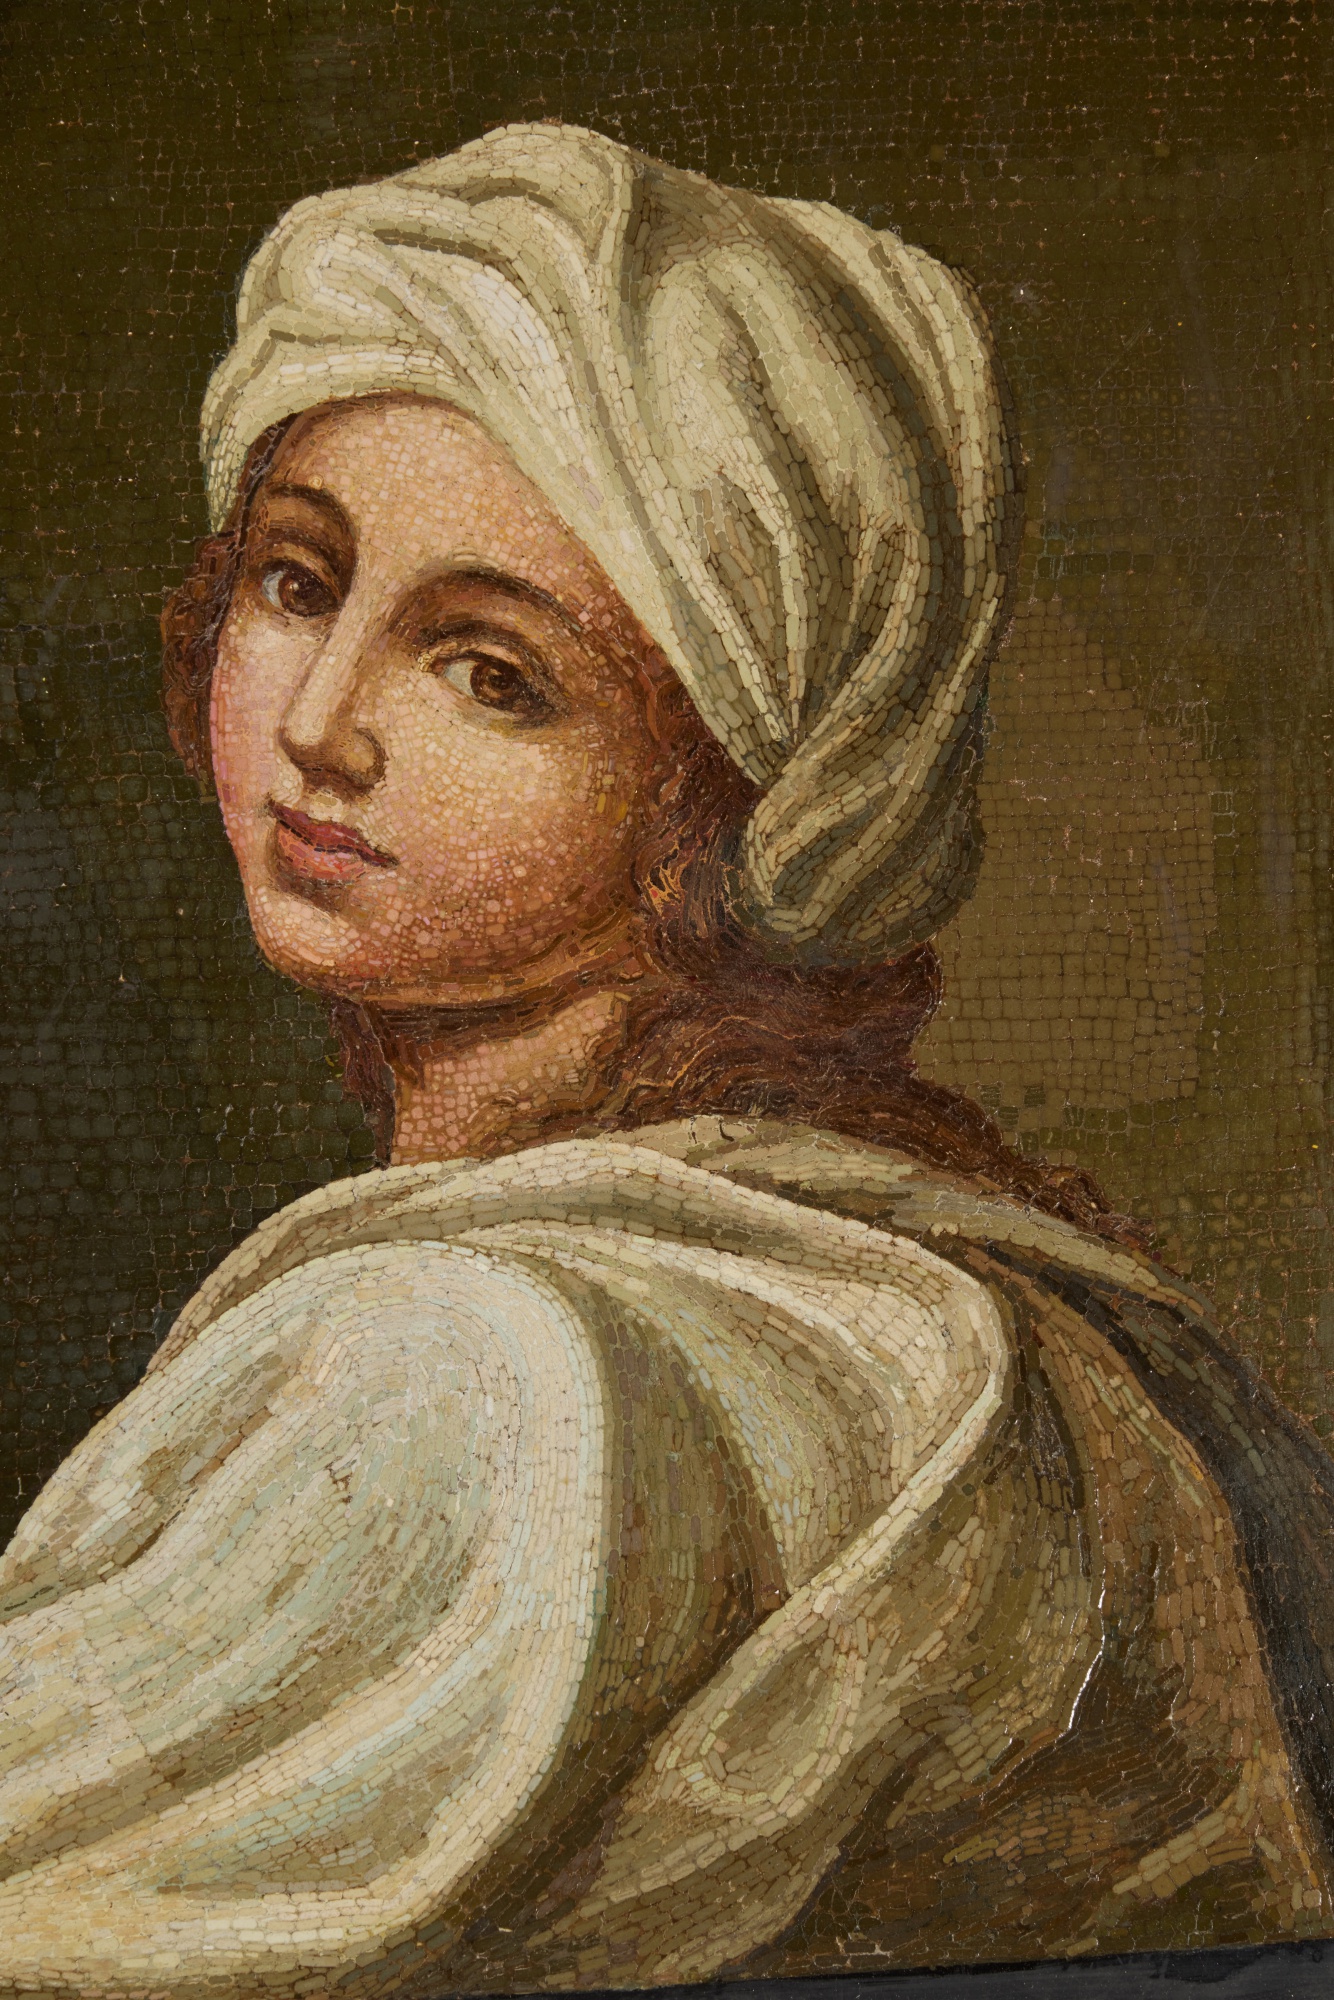 An Italian Framed Micromosaic Portrait of Beatrice Cenci, Rome, 19th Century - Image 3 of 4